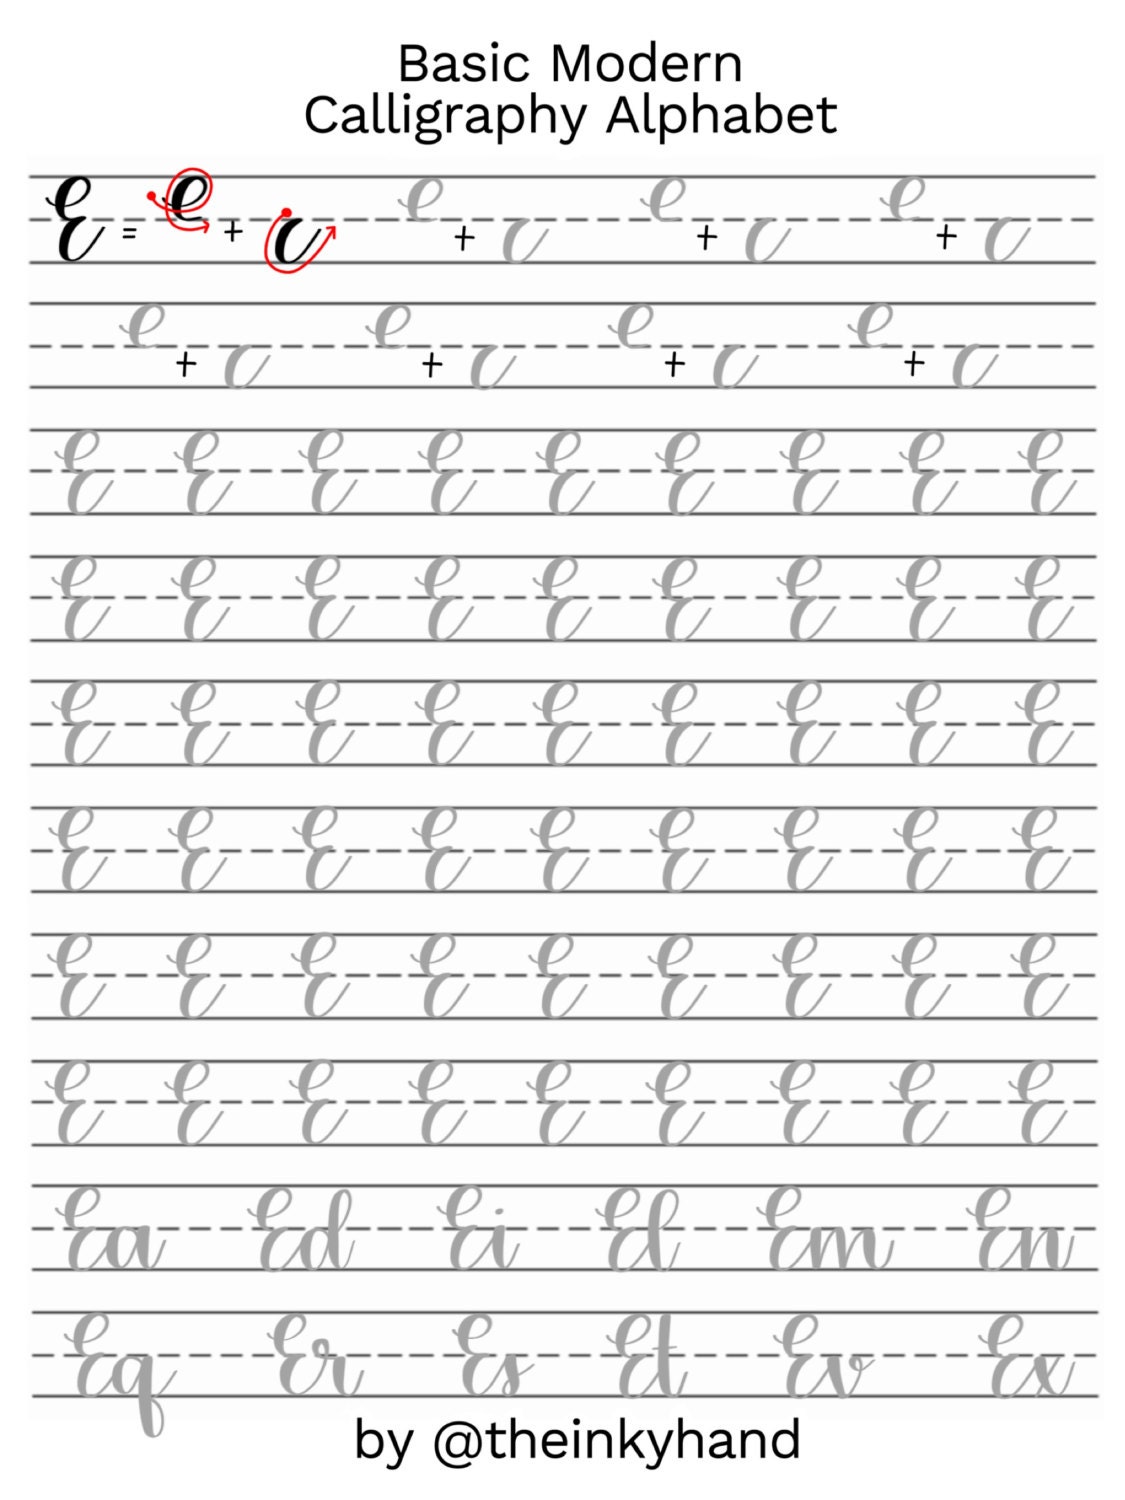 Pointed Pen Calligraphy Worksheet, Bouncy Modern Calligraphy Alphabet  Practice Guide, Learn Calligraphy Printable Calligraphy Practice Sheet 